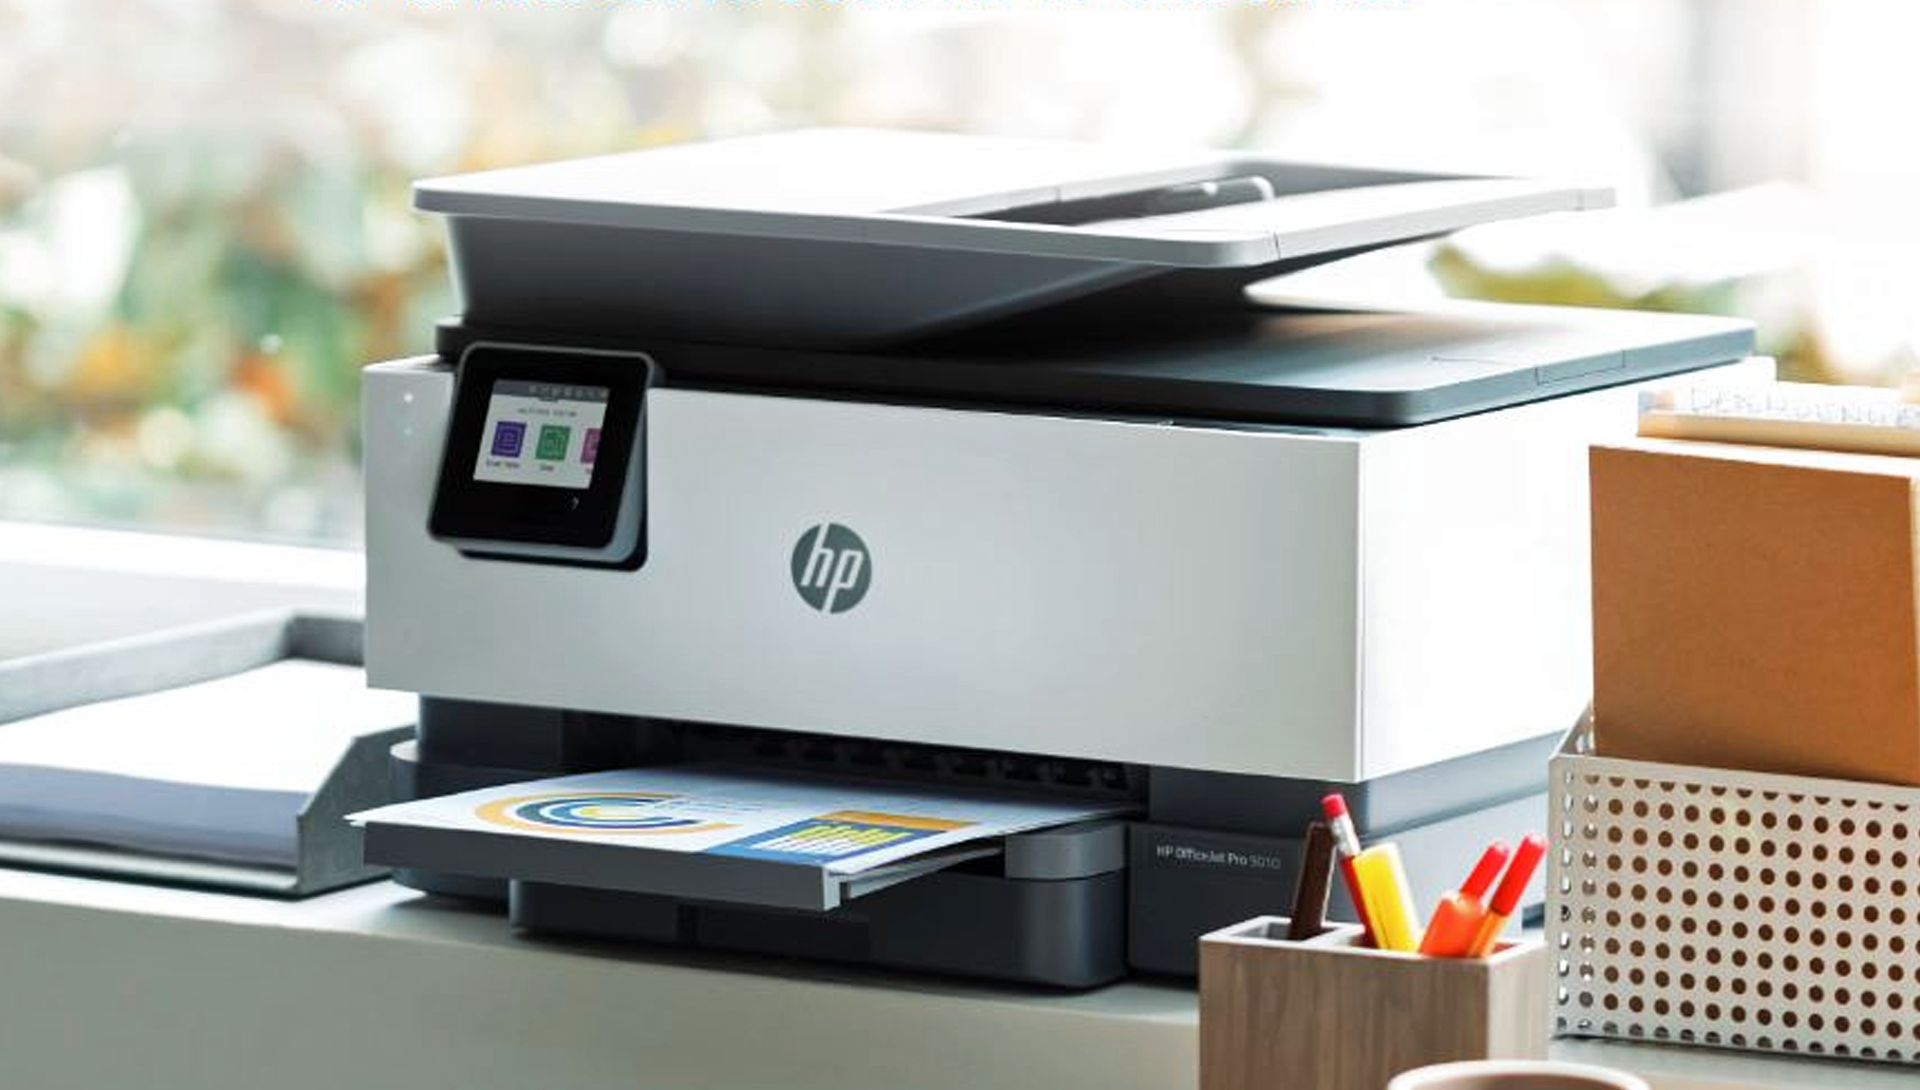 Buy HP Printers - Get Setup Help - 123HPMart Support Services